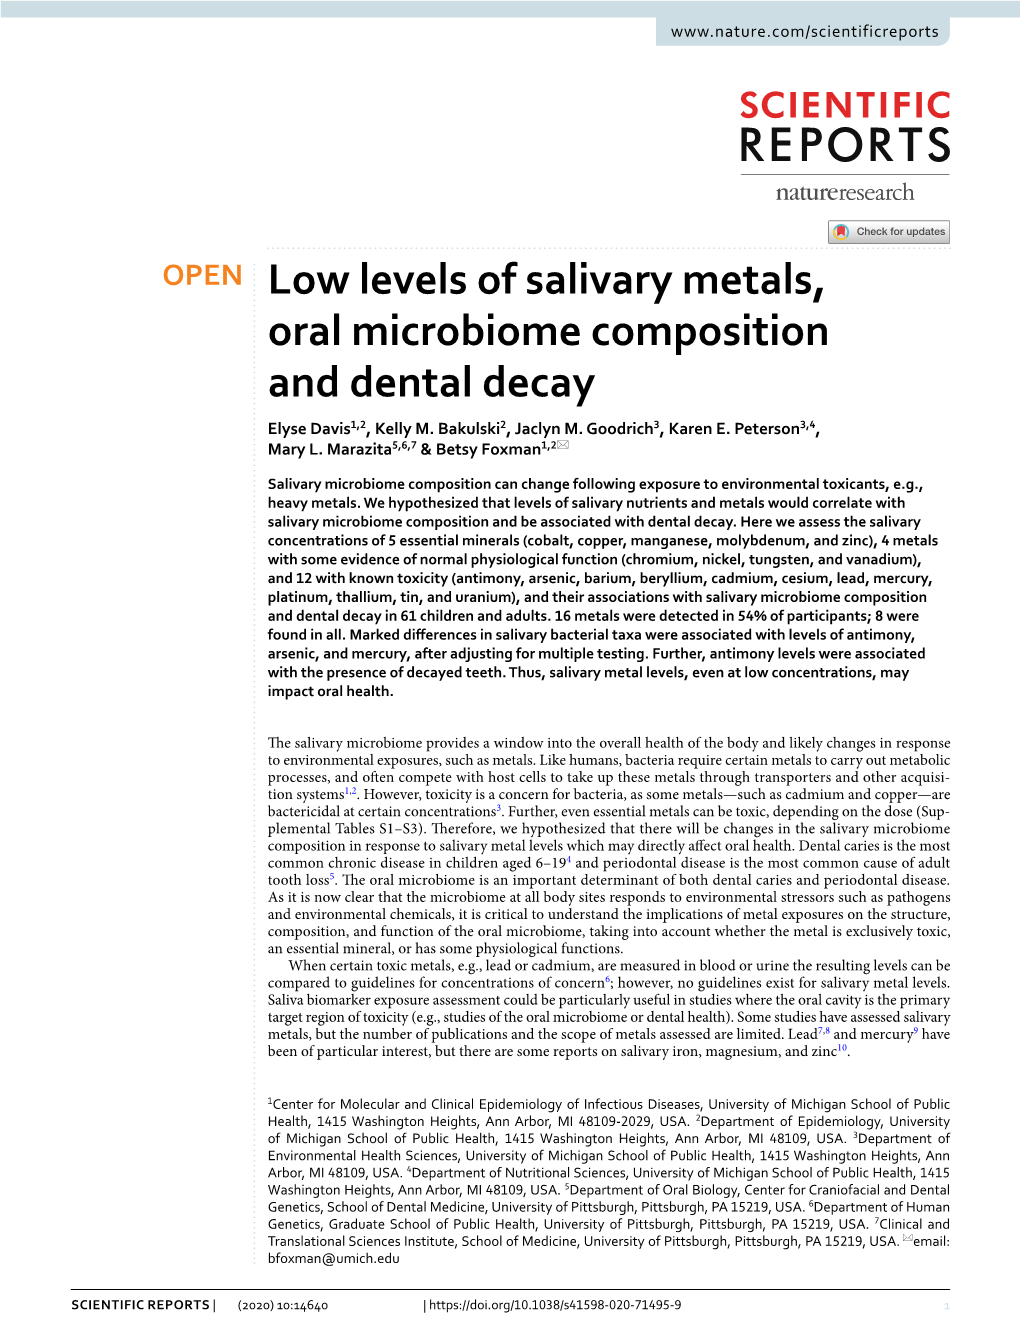 Low Levels of Salivary Metals, Oral Microbiome Composition and Dental Decay Elyse Davis1,2, Kelly M